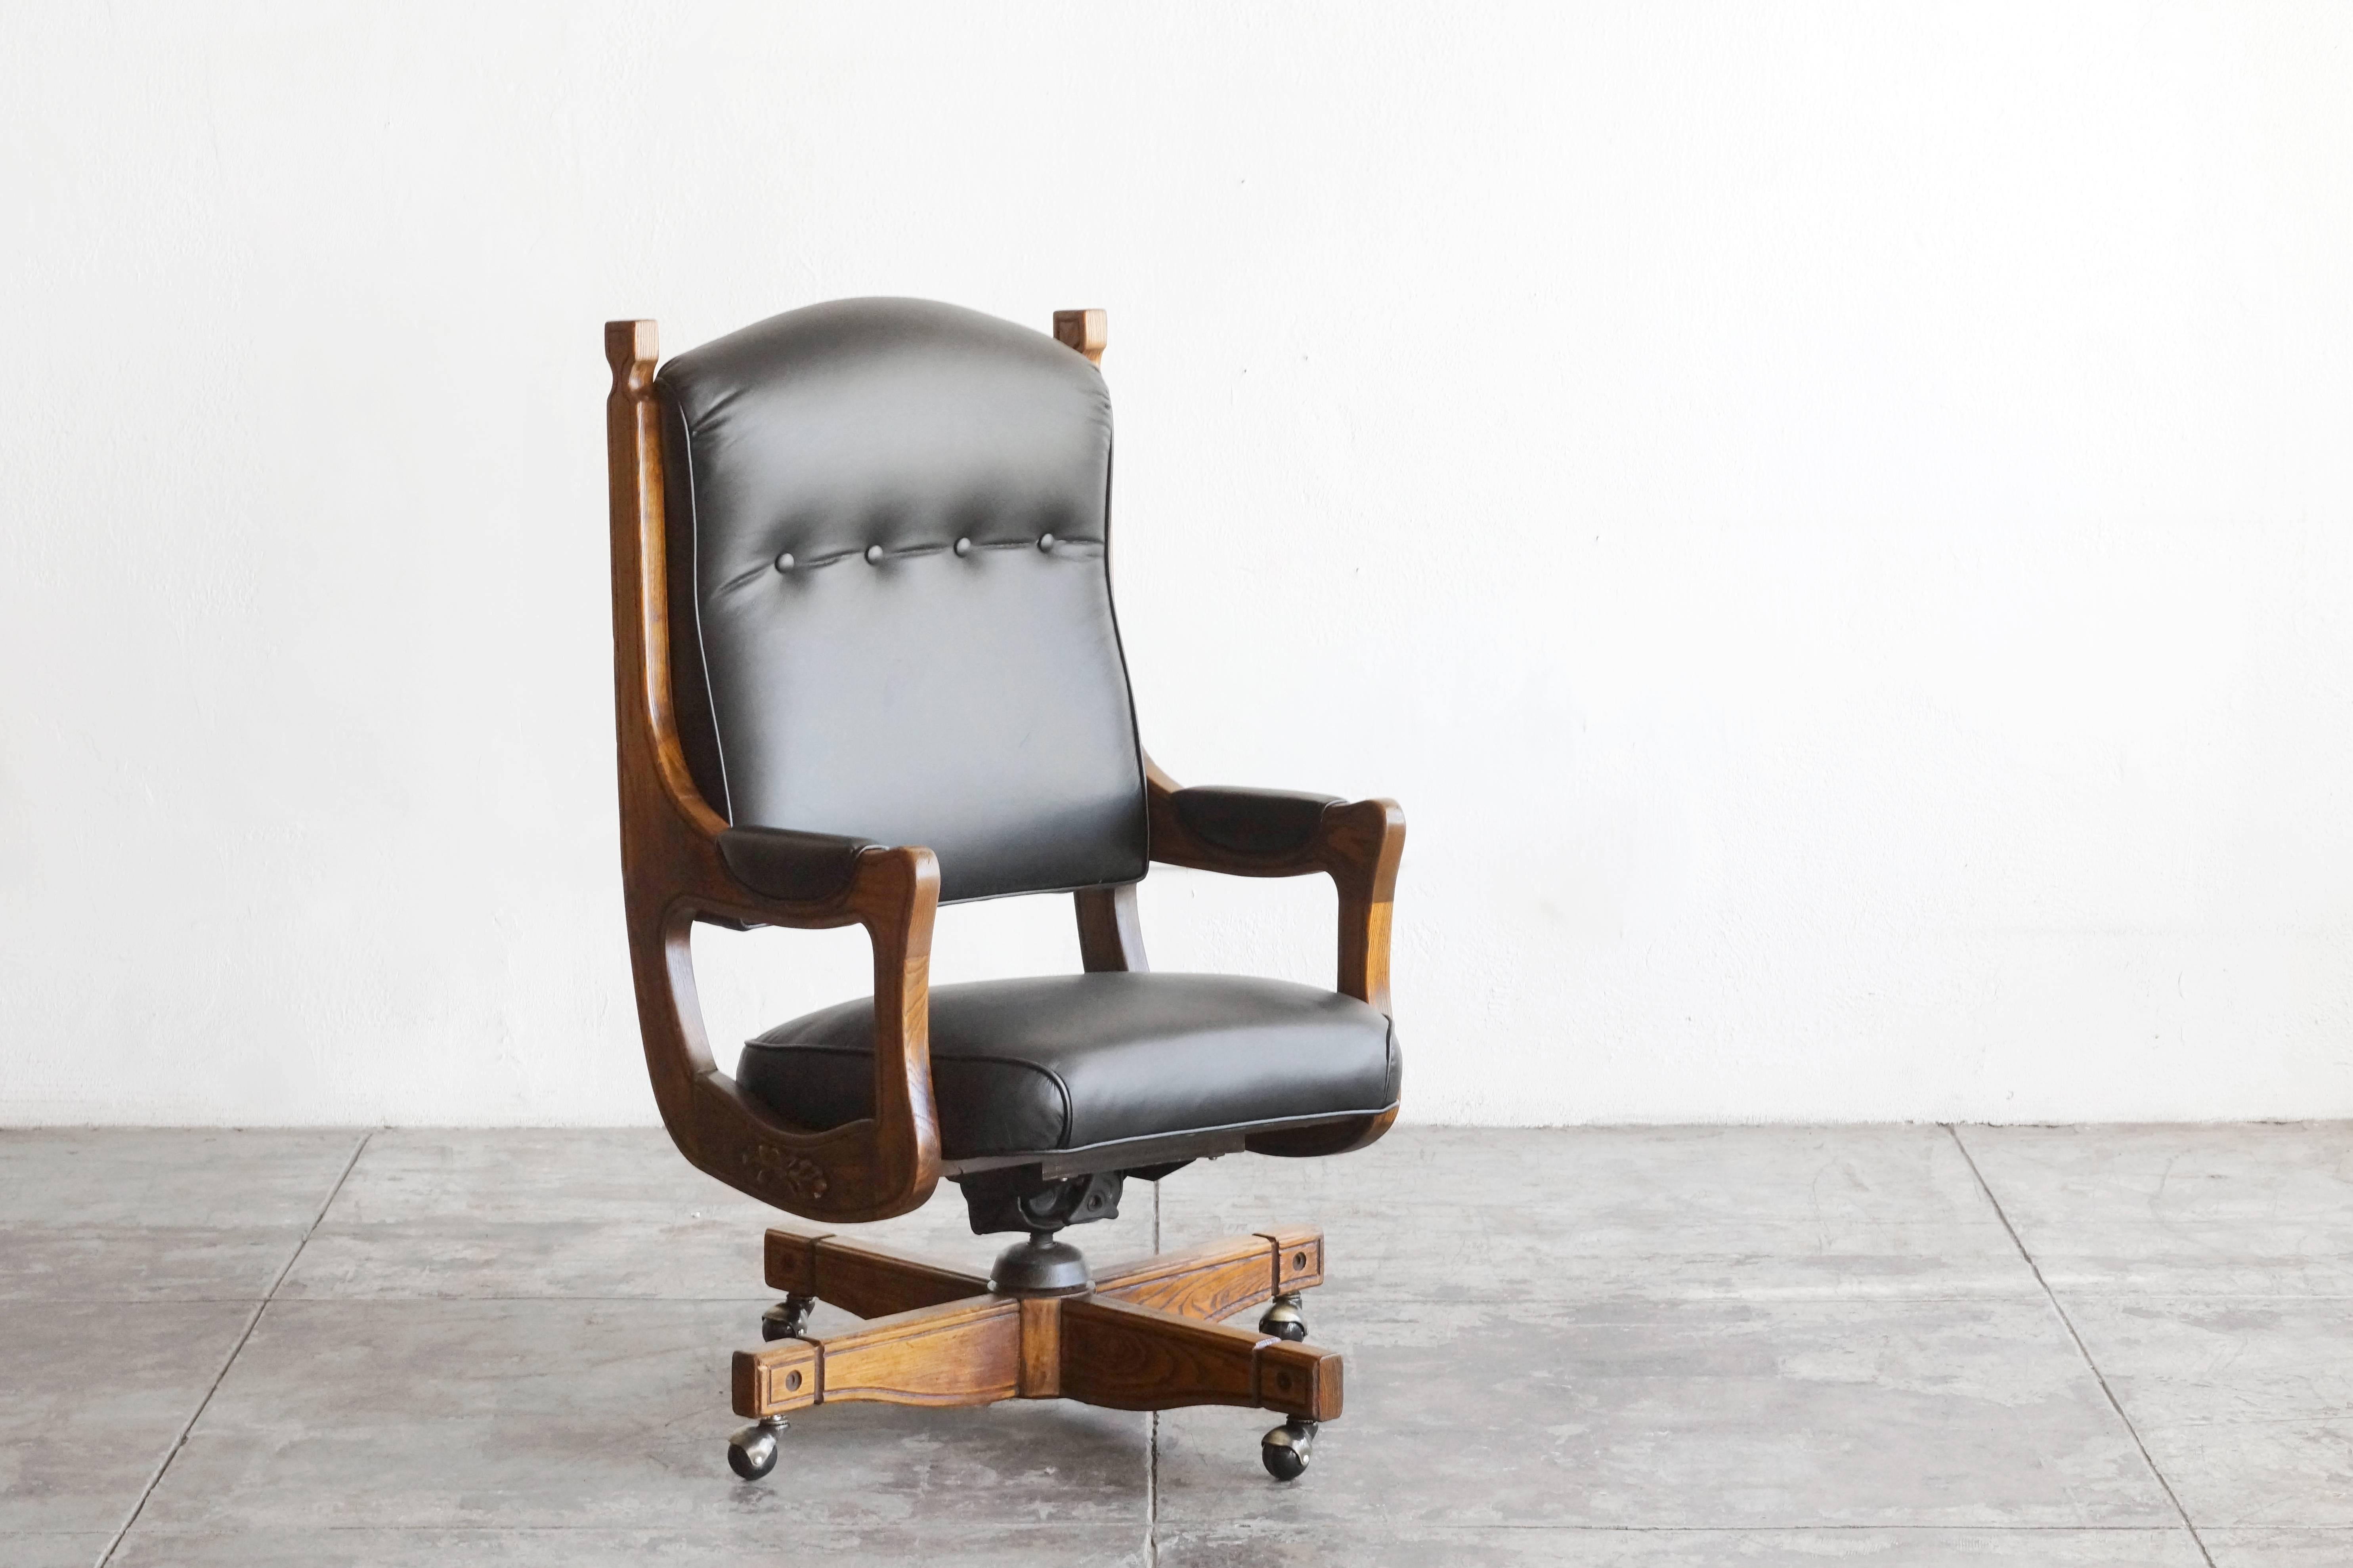 Impressive solid oak and tufted leather captains chair. Iconic Chesterfield style with solid oak 